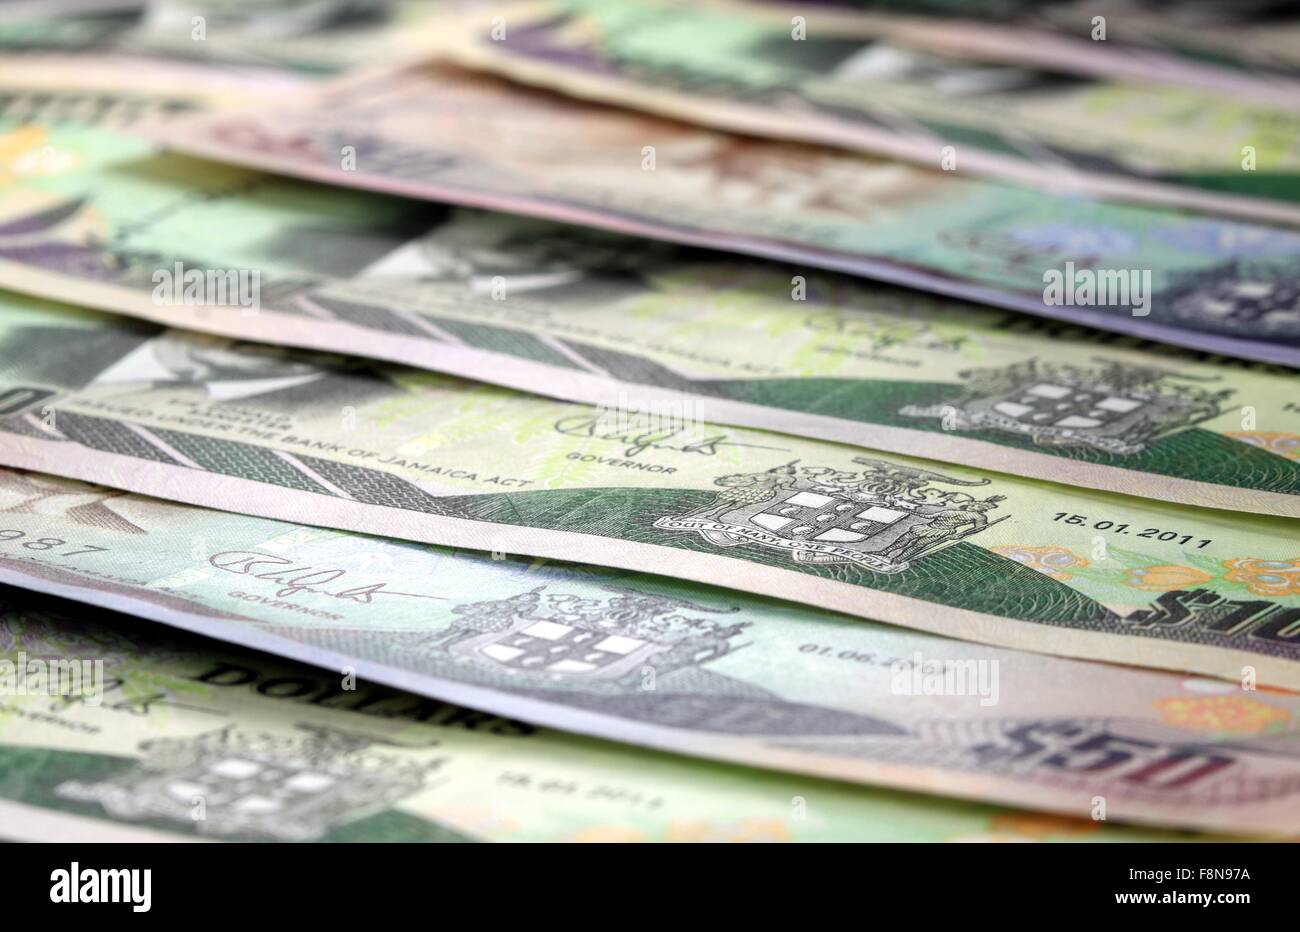 Jamaica currency - Banking and economic stability concept Stock Photo